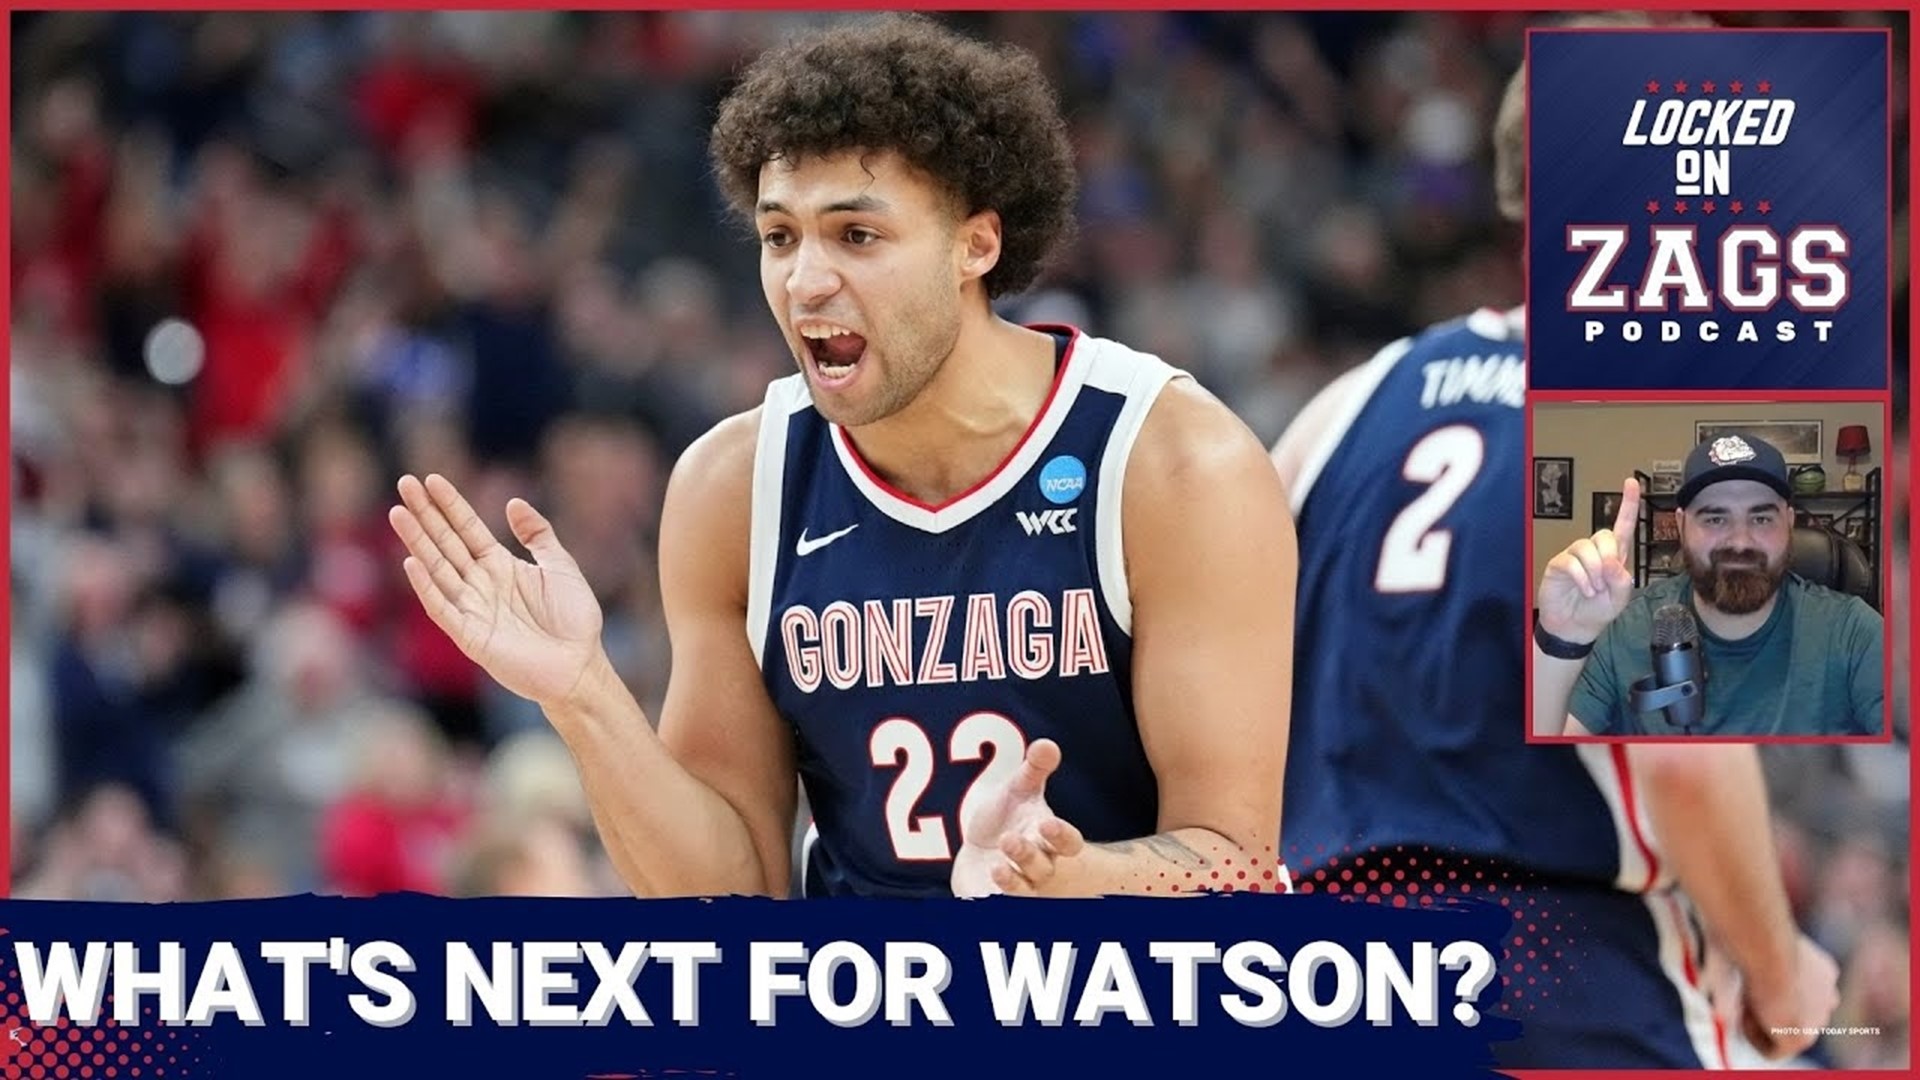 Gonzaga Bulldogs forward Anton Watson performed well at the G-League combine, but did not receive an additional invite to the NBA draft combine.